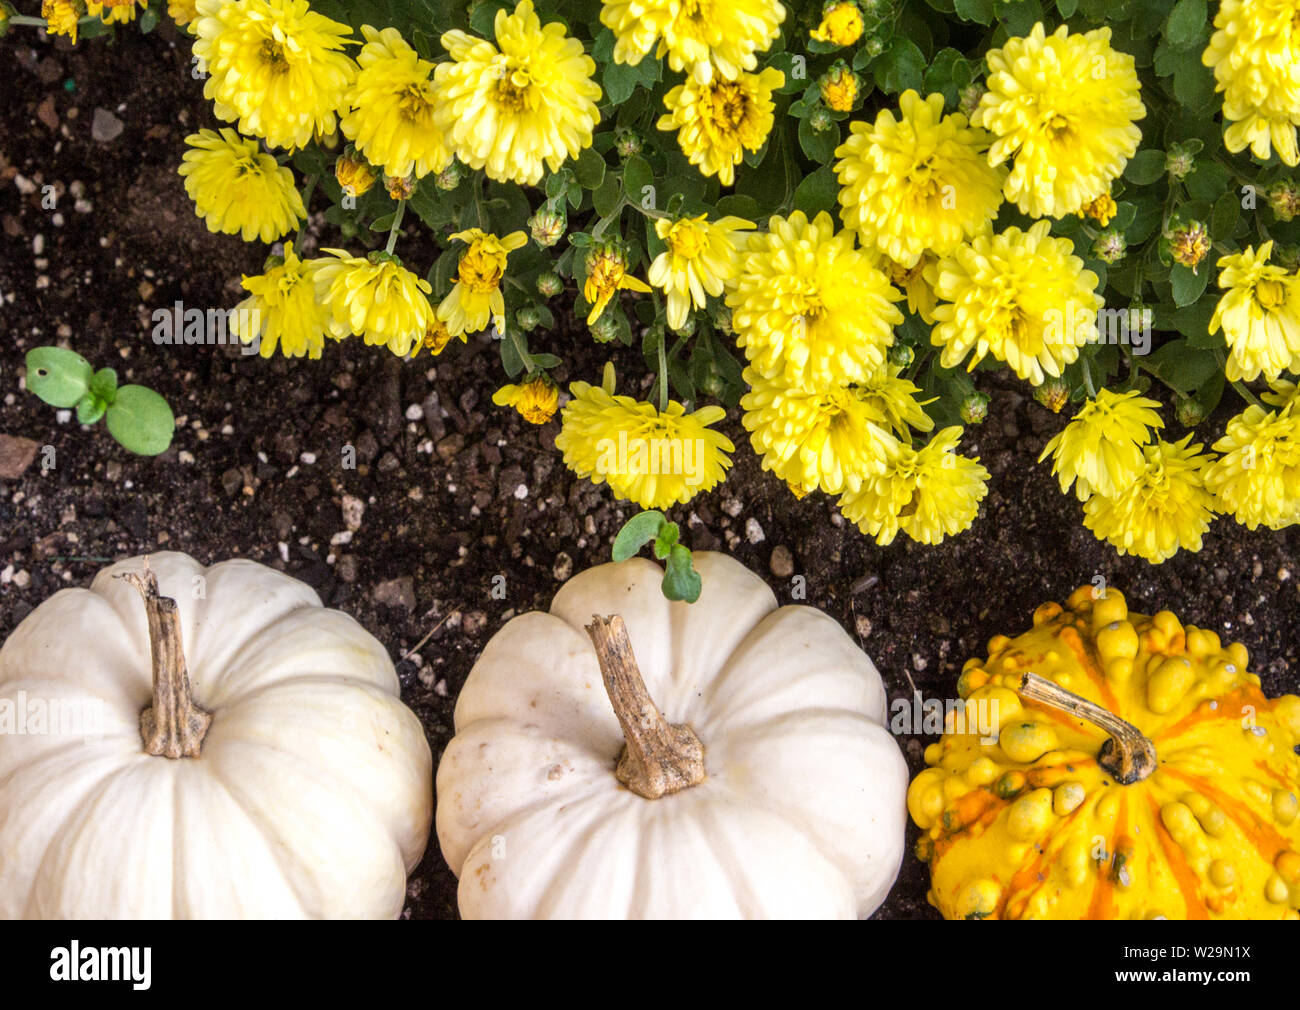 Autumn Harvest Background. Pumpkins and gourds paired with vibrant colored Chrysanthemums in rich black garden soil. Stock Photo